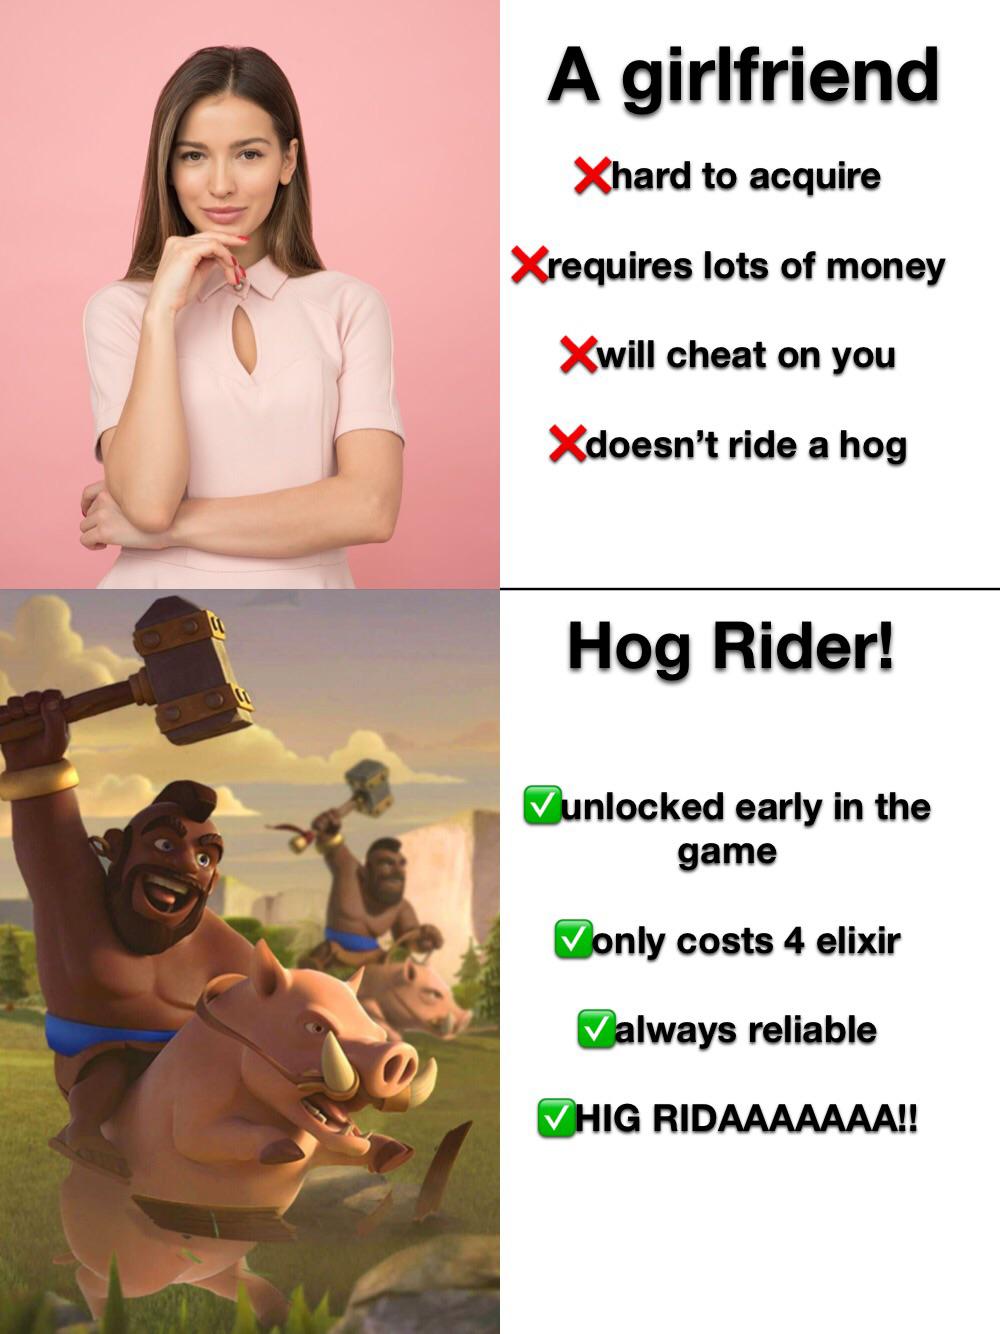 clash royale hog rider - A girlfriend Xhard to acquire Xrequires lots of money Xwill cheat on you Xdoesn't ride a hog Hog Rider! Dunlocked early in the game only costs 4 elixir Valways reliable Hig Ridaaaaaaa!!